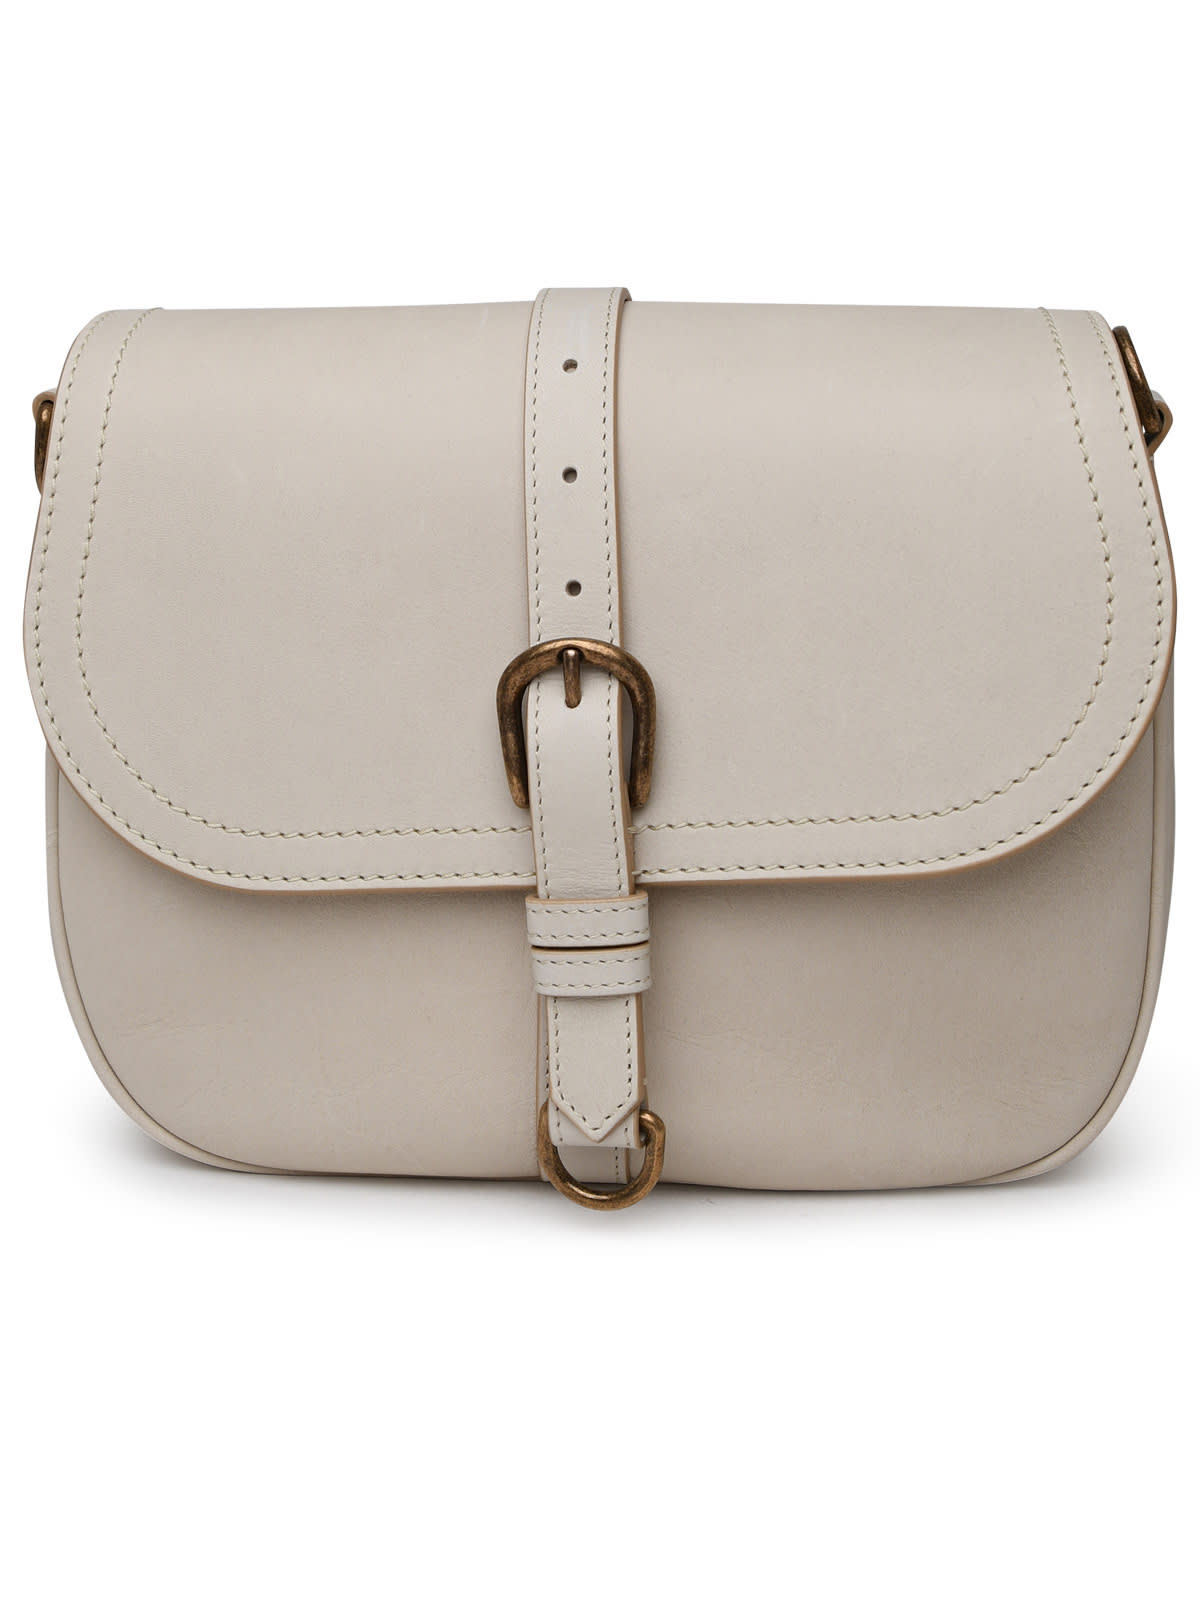 GOLDEN GOOSE SALLY LEATHER BAG